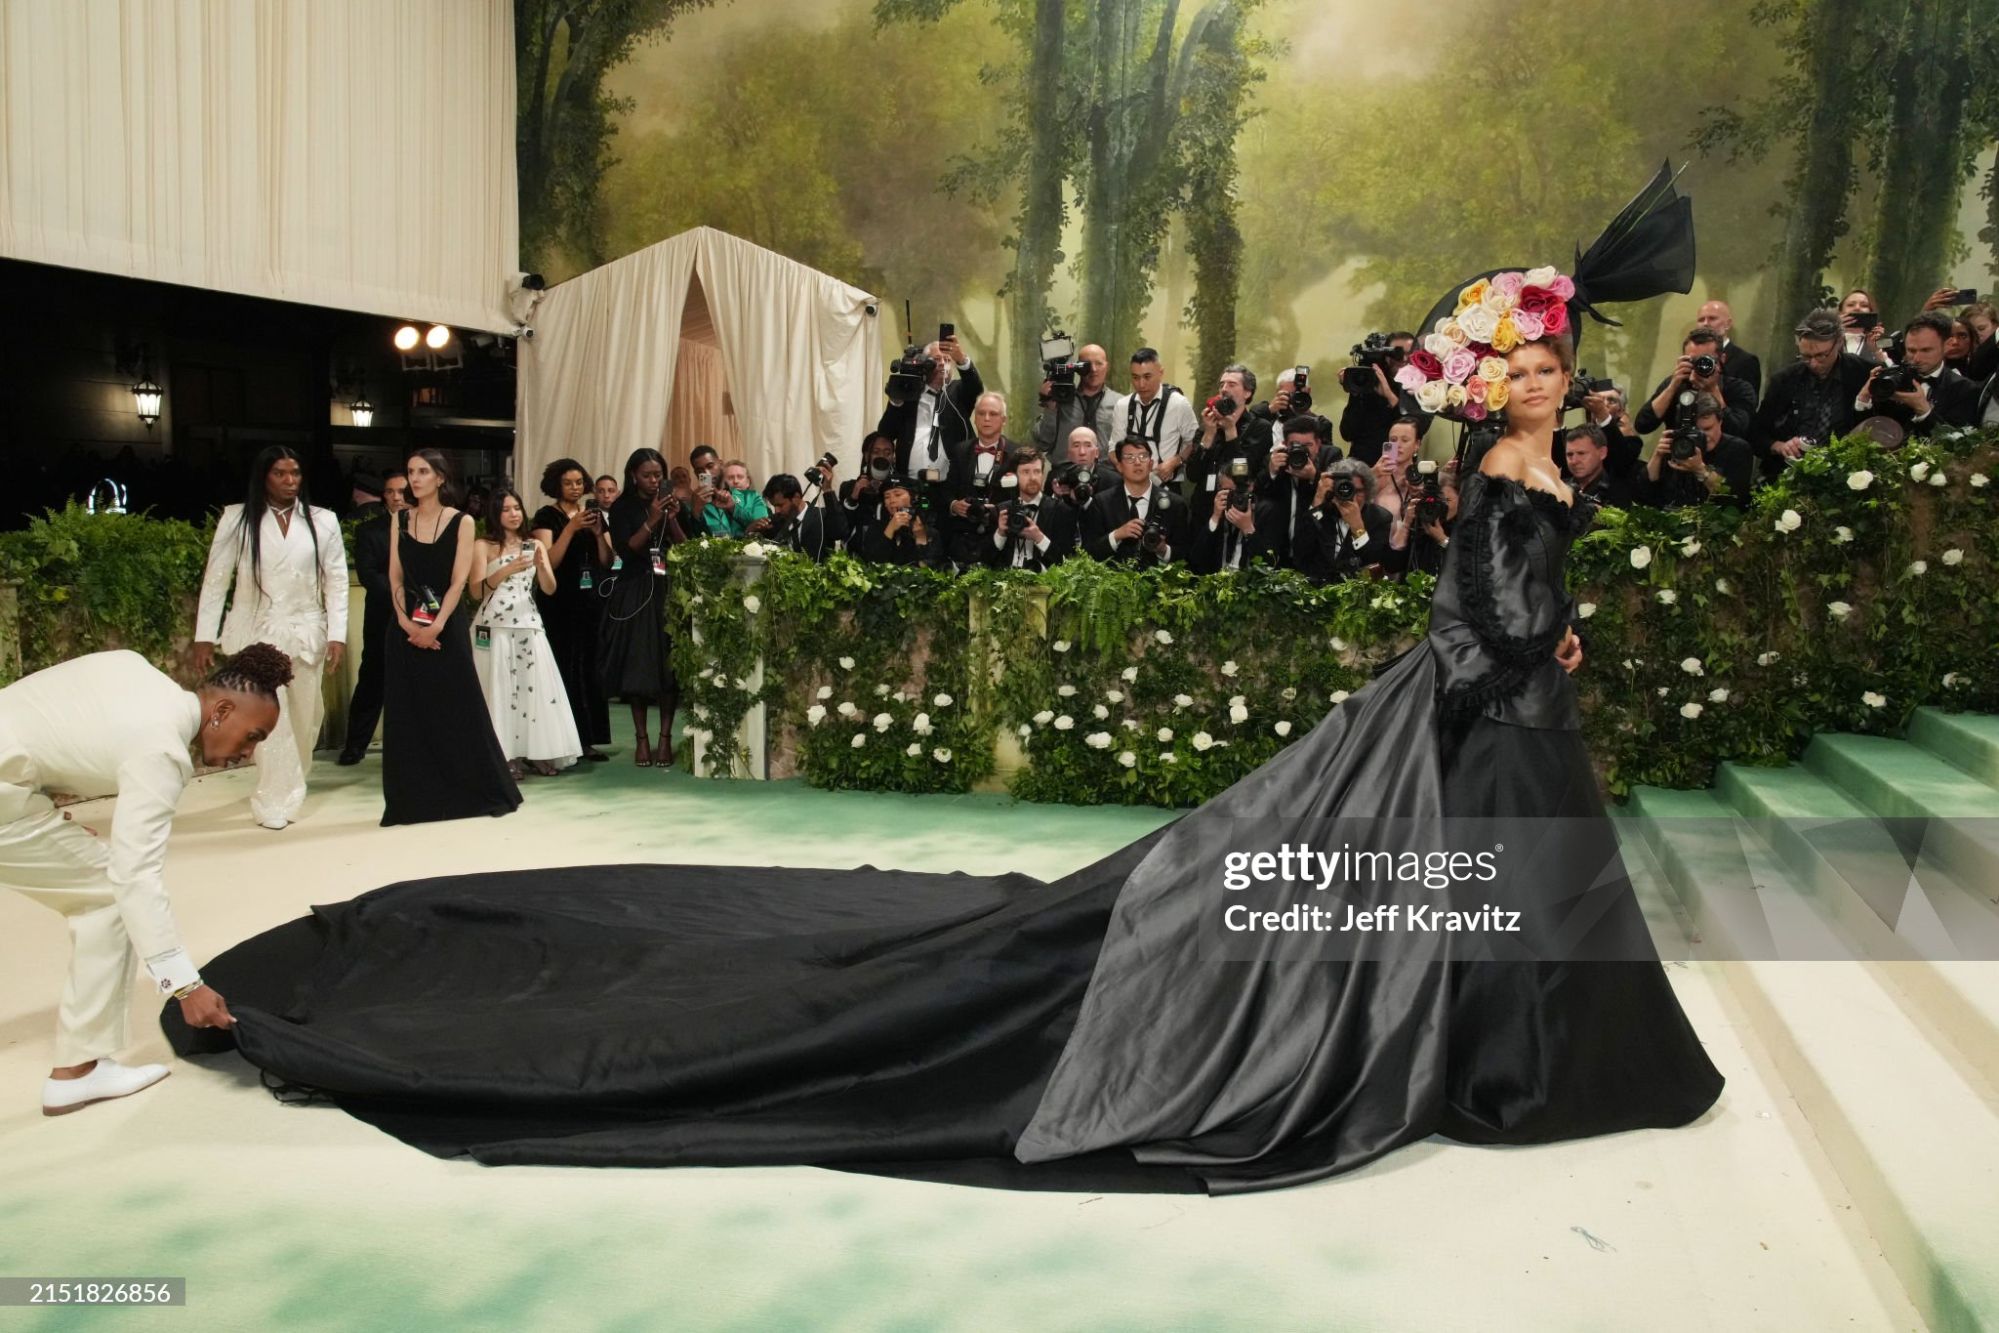 gettyimages-2151826856-2048x2048.jpg